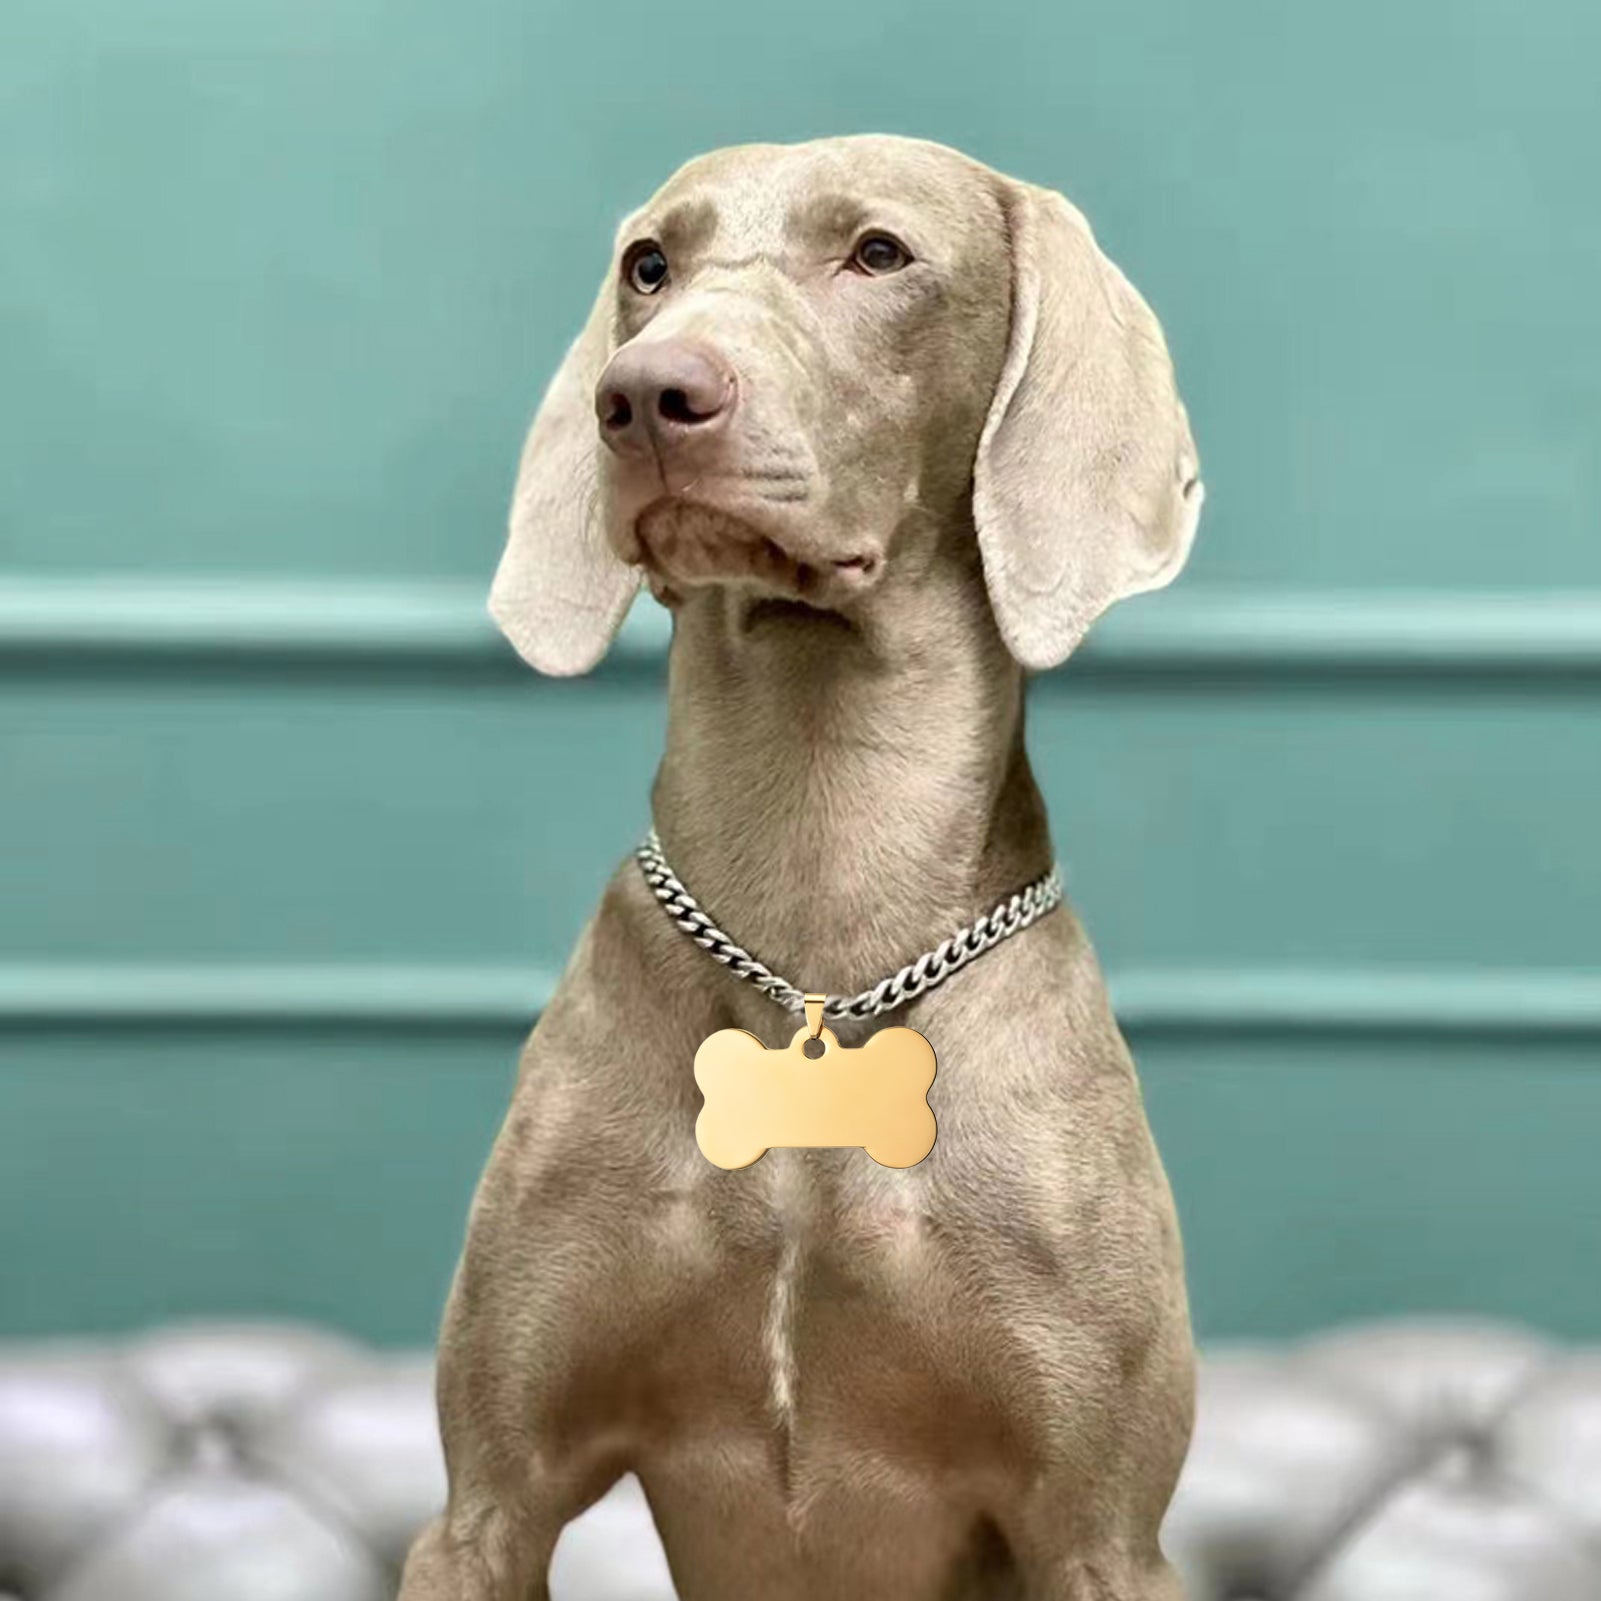 A light brown Weimaraner dog sits in front of a turquoise wall. Wearing a thick silver chain collar with a golden CrealityFalcon 20pcs Titanium Steel Blank Stamping Tags Pets Tag Metal Pendant Charm for Falcon Laser Engraving, it gazes attentively at something off-camera. A tufted gray sofa is partially visible at the bottom, adding a touch of craft to the scene’s composition.